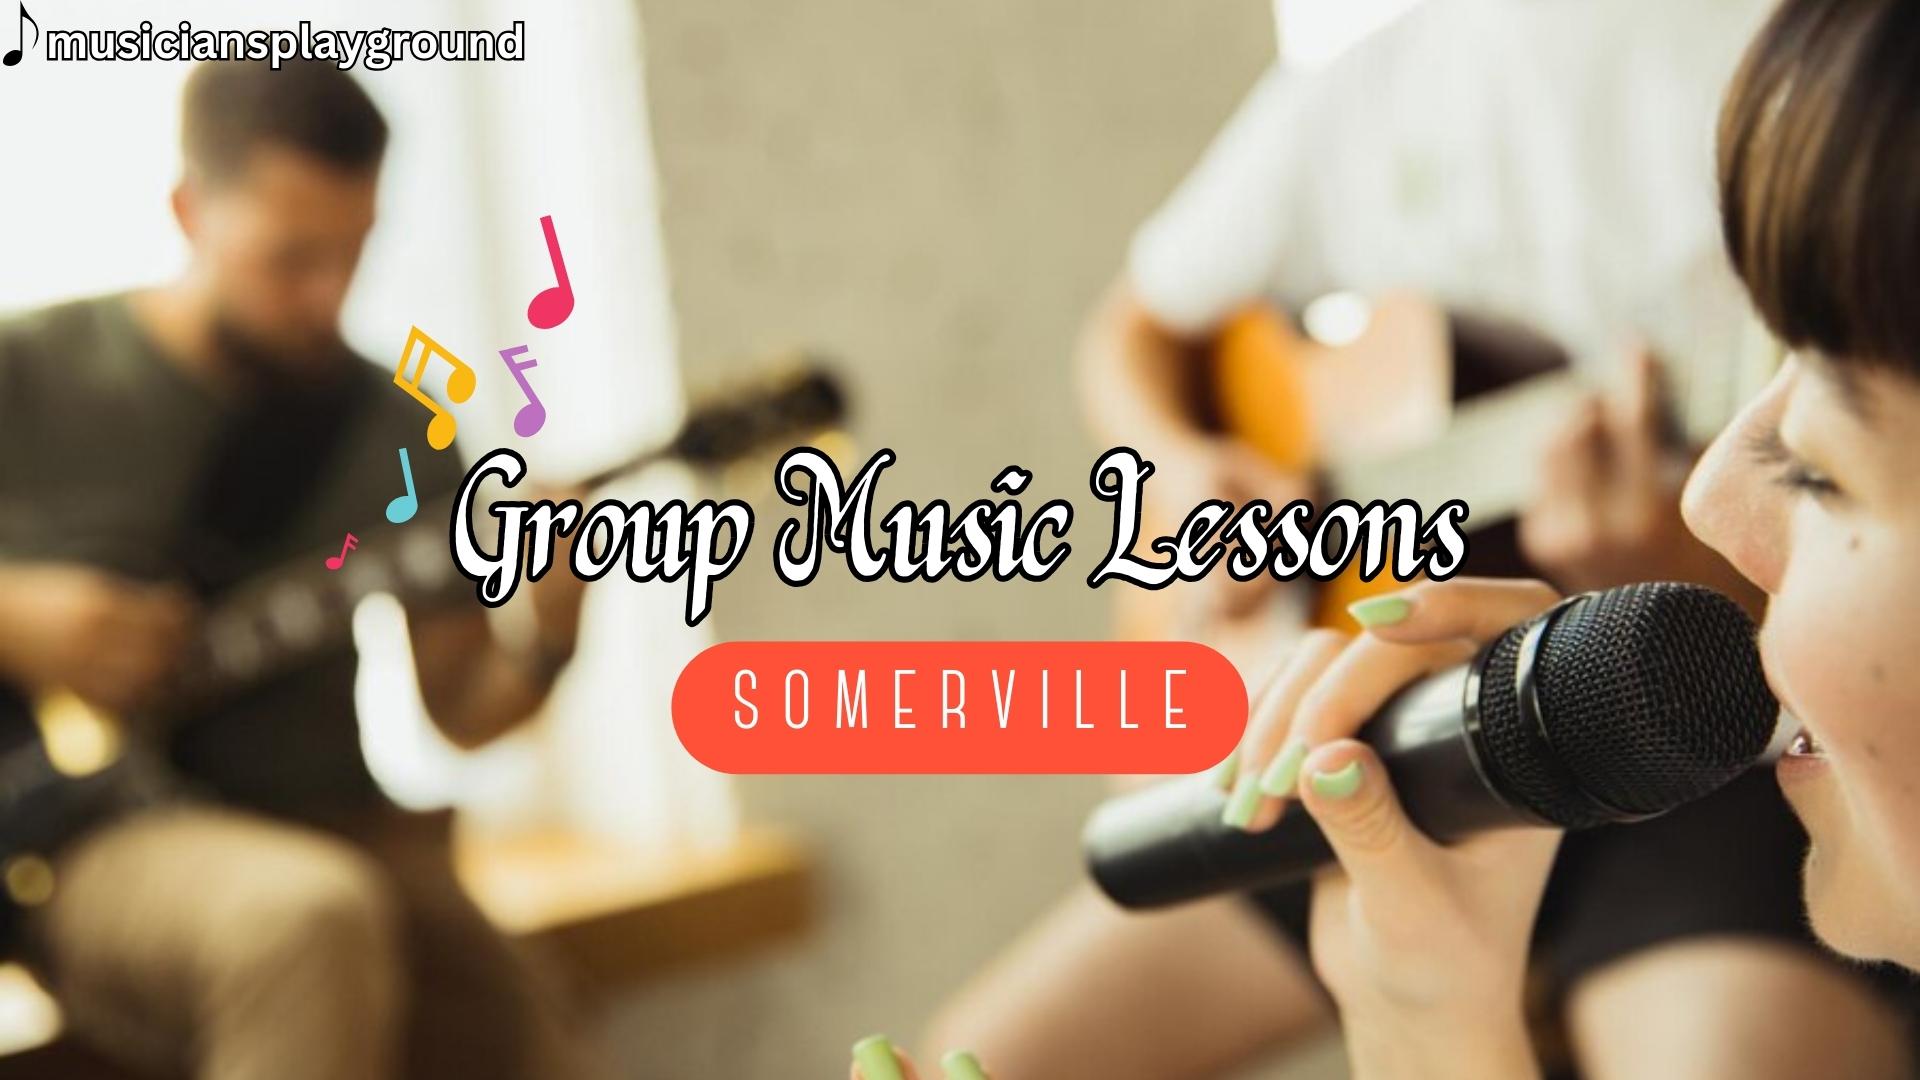 Group Music Lessons in Somerville: Collaborative Music Learning at Musicians Playground